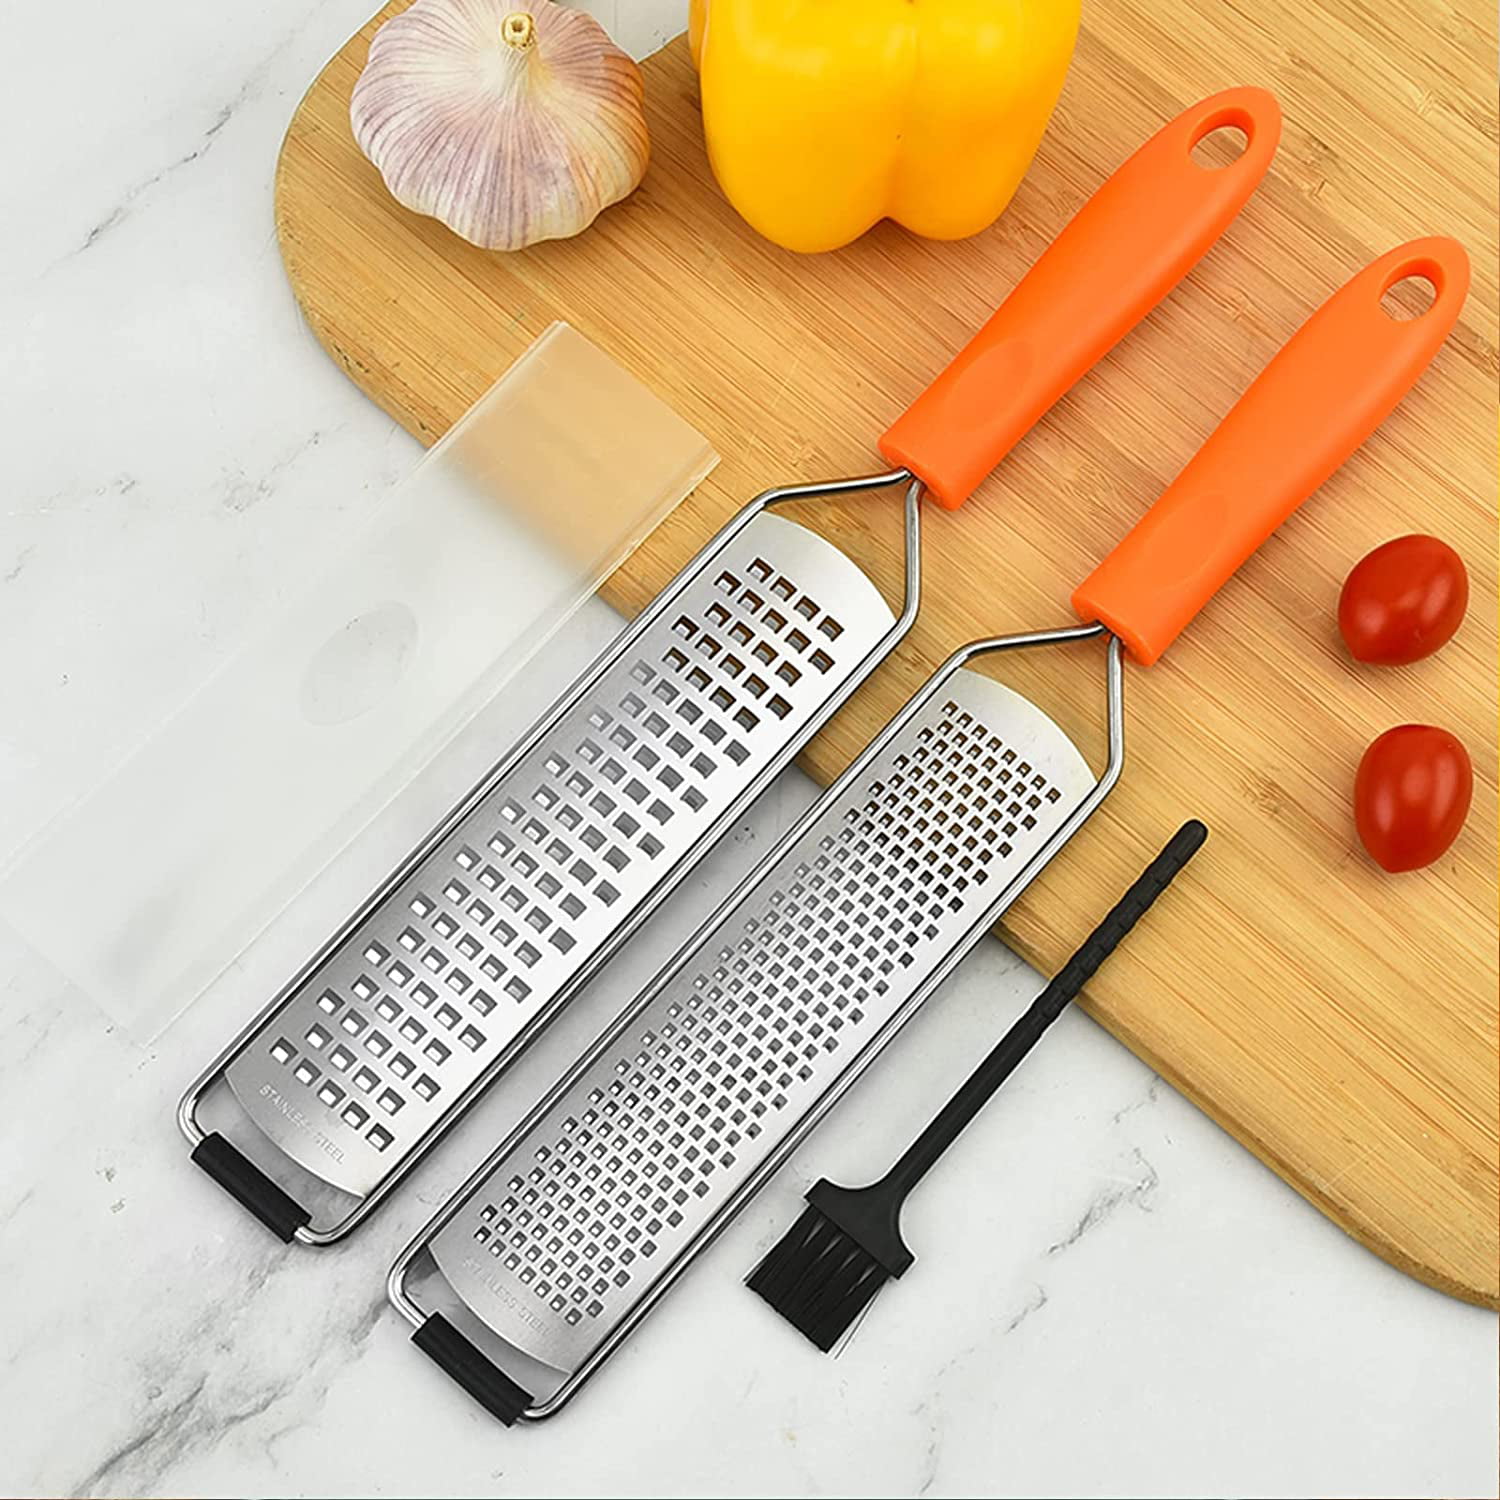 Food Grade Stainless Steel Ginger Grater, Handheld Kitchen Graters Tool for  Garlic Chocolate Cheese Vegetables Fruits Shredder Grater Kitchen Tool  Wbb12270 - China Garlic Grater and Ginger Grater price